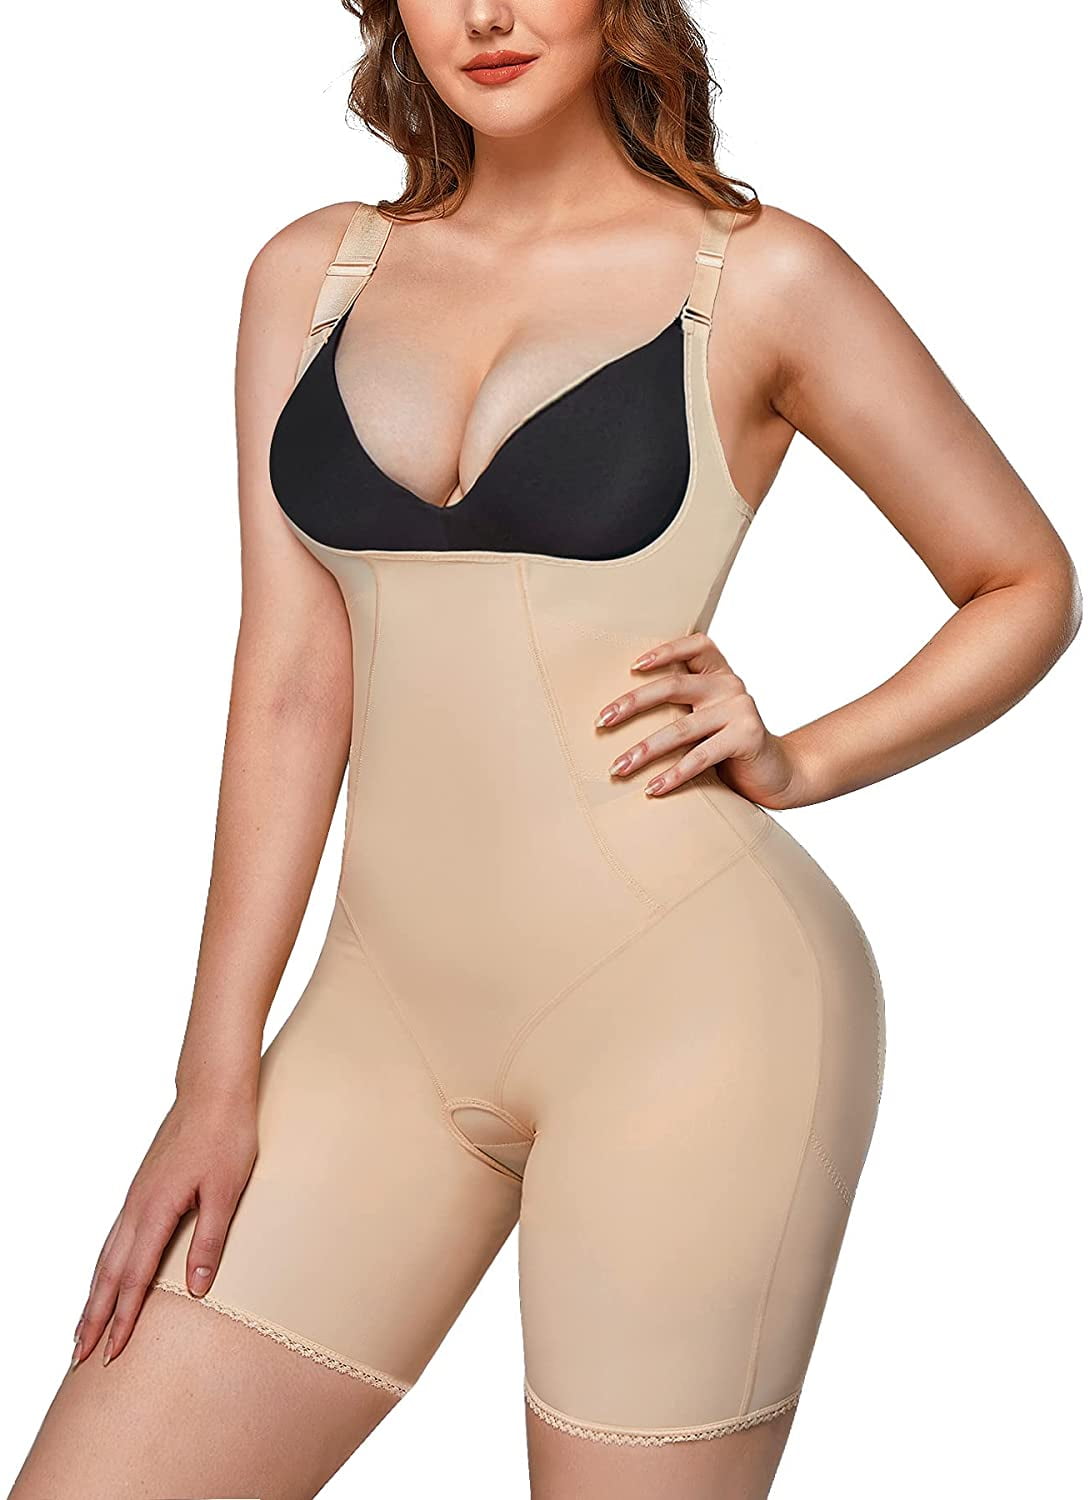 Women Post Surgery Lipo Compression Garment Butt Lifter Tummy Control  Shapewear Thigh Slimmer Shorts (Color : Beige, Size : Small) at   Women's Clothing store